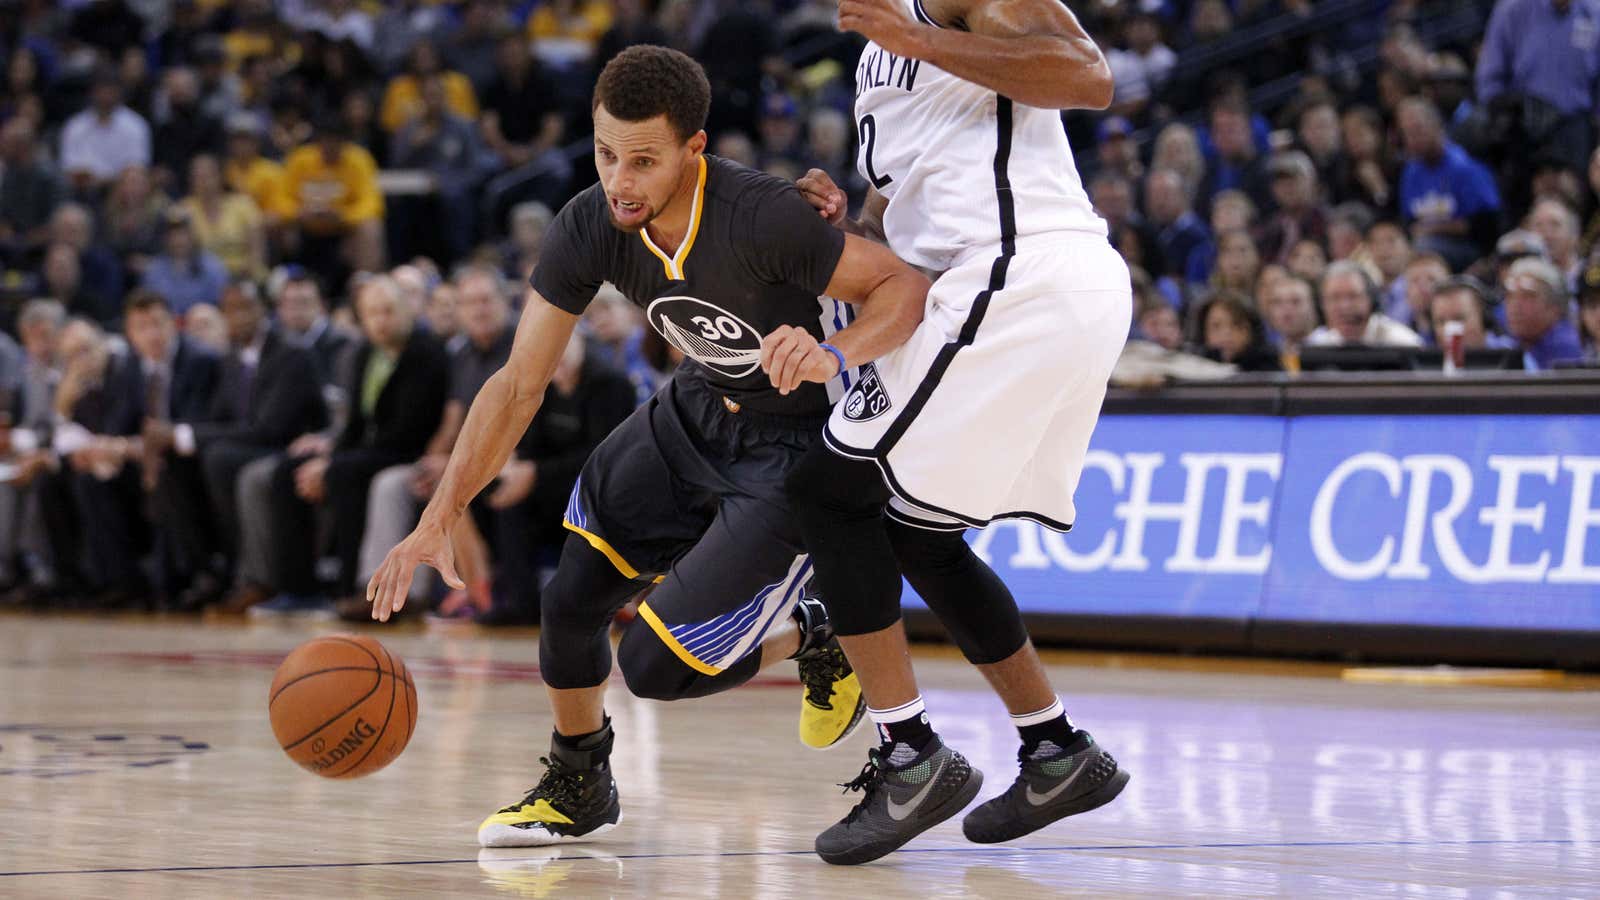 A Nike legend would “love” to design a pair of sneakers for Under Armour-sponsored Curry.